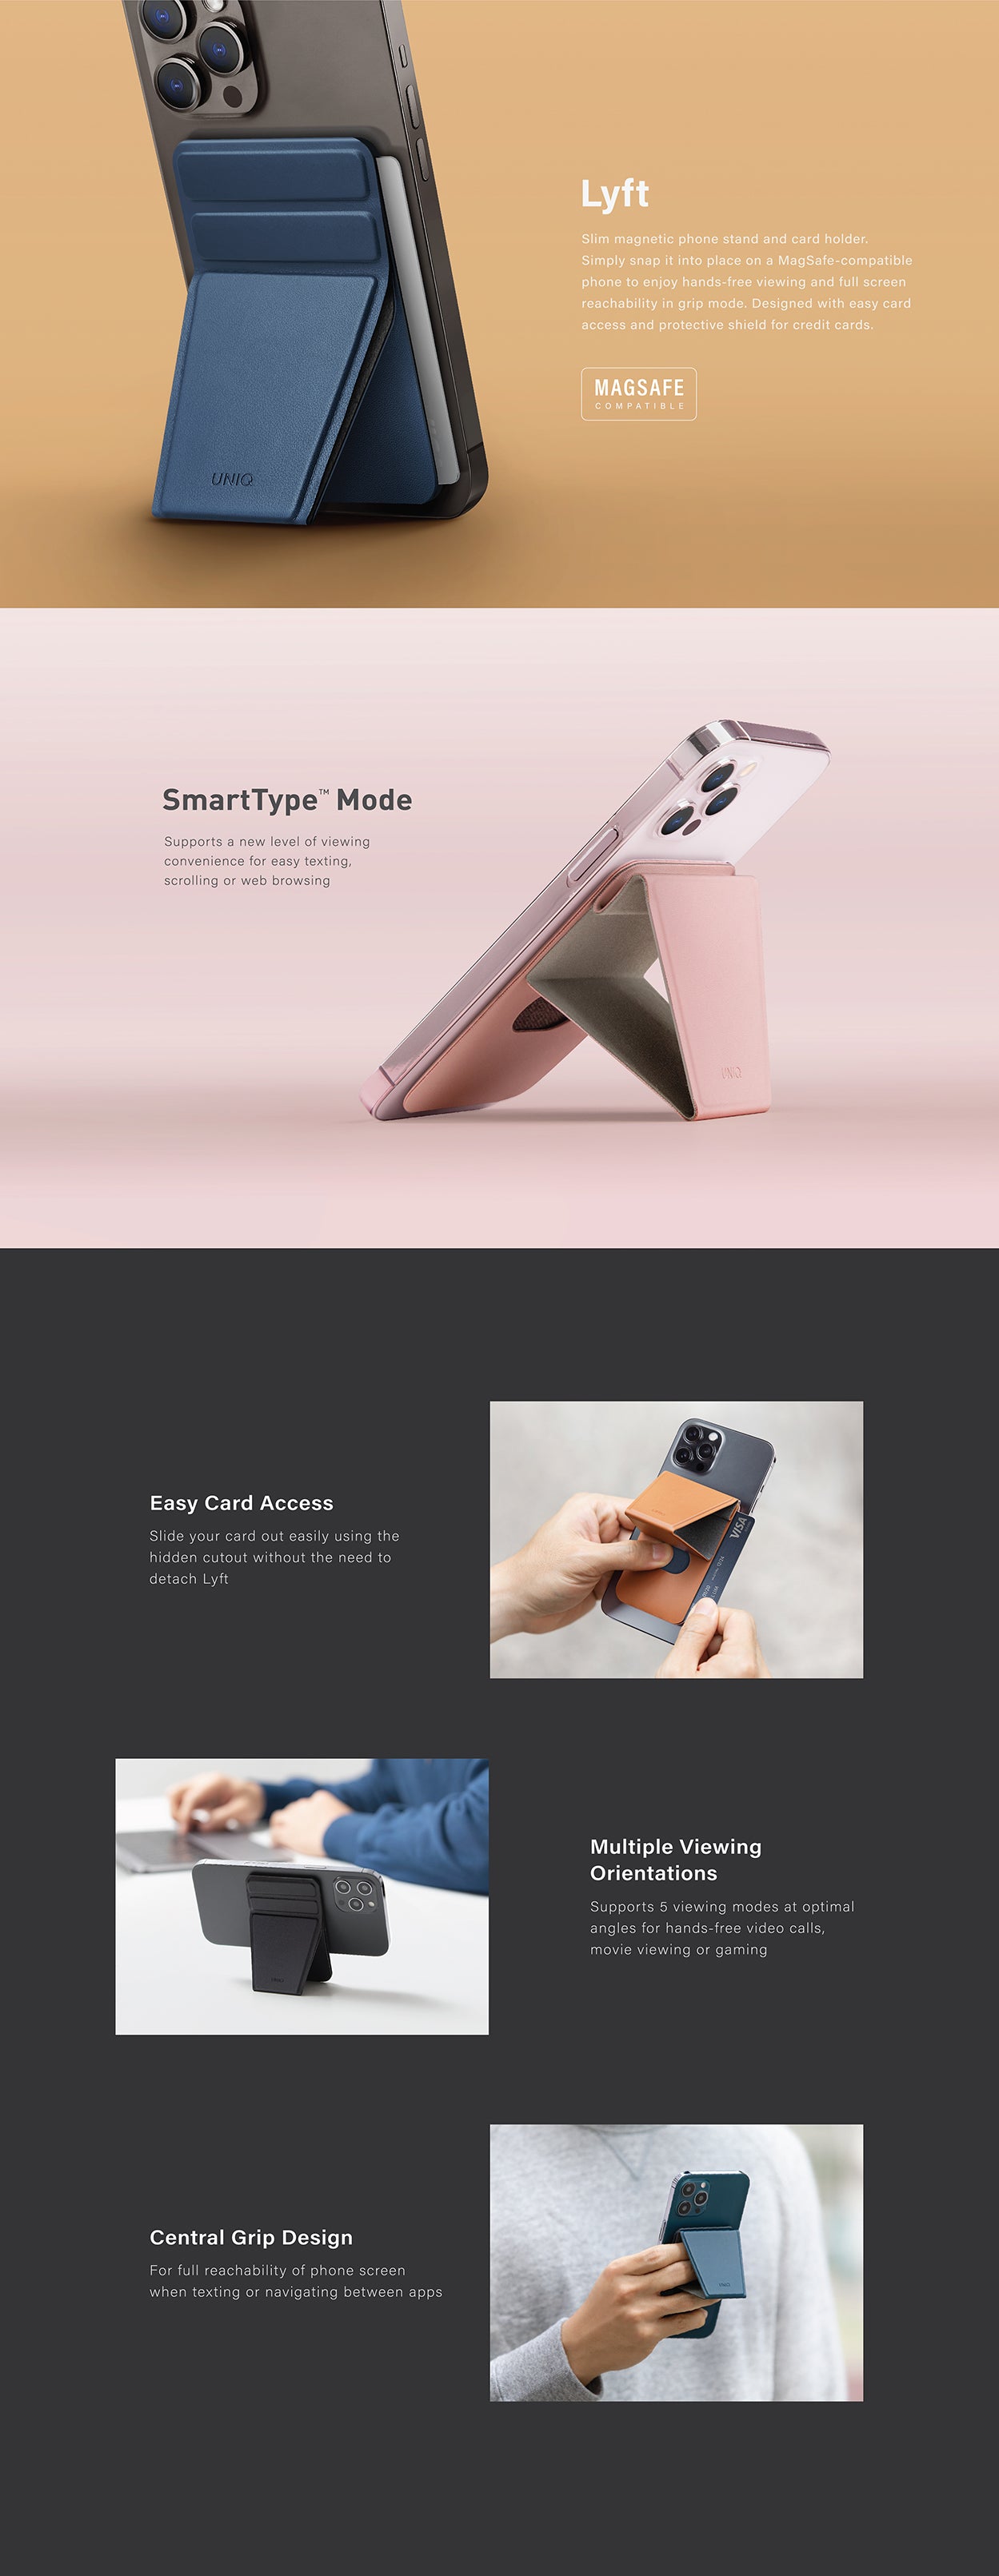 UNIQ Lyft Magnetic Stand/ Grip and Card Holder for iPhone 12 and 13. Compatible with MagSafe